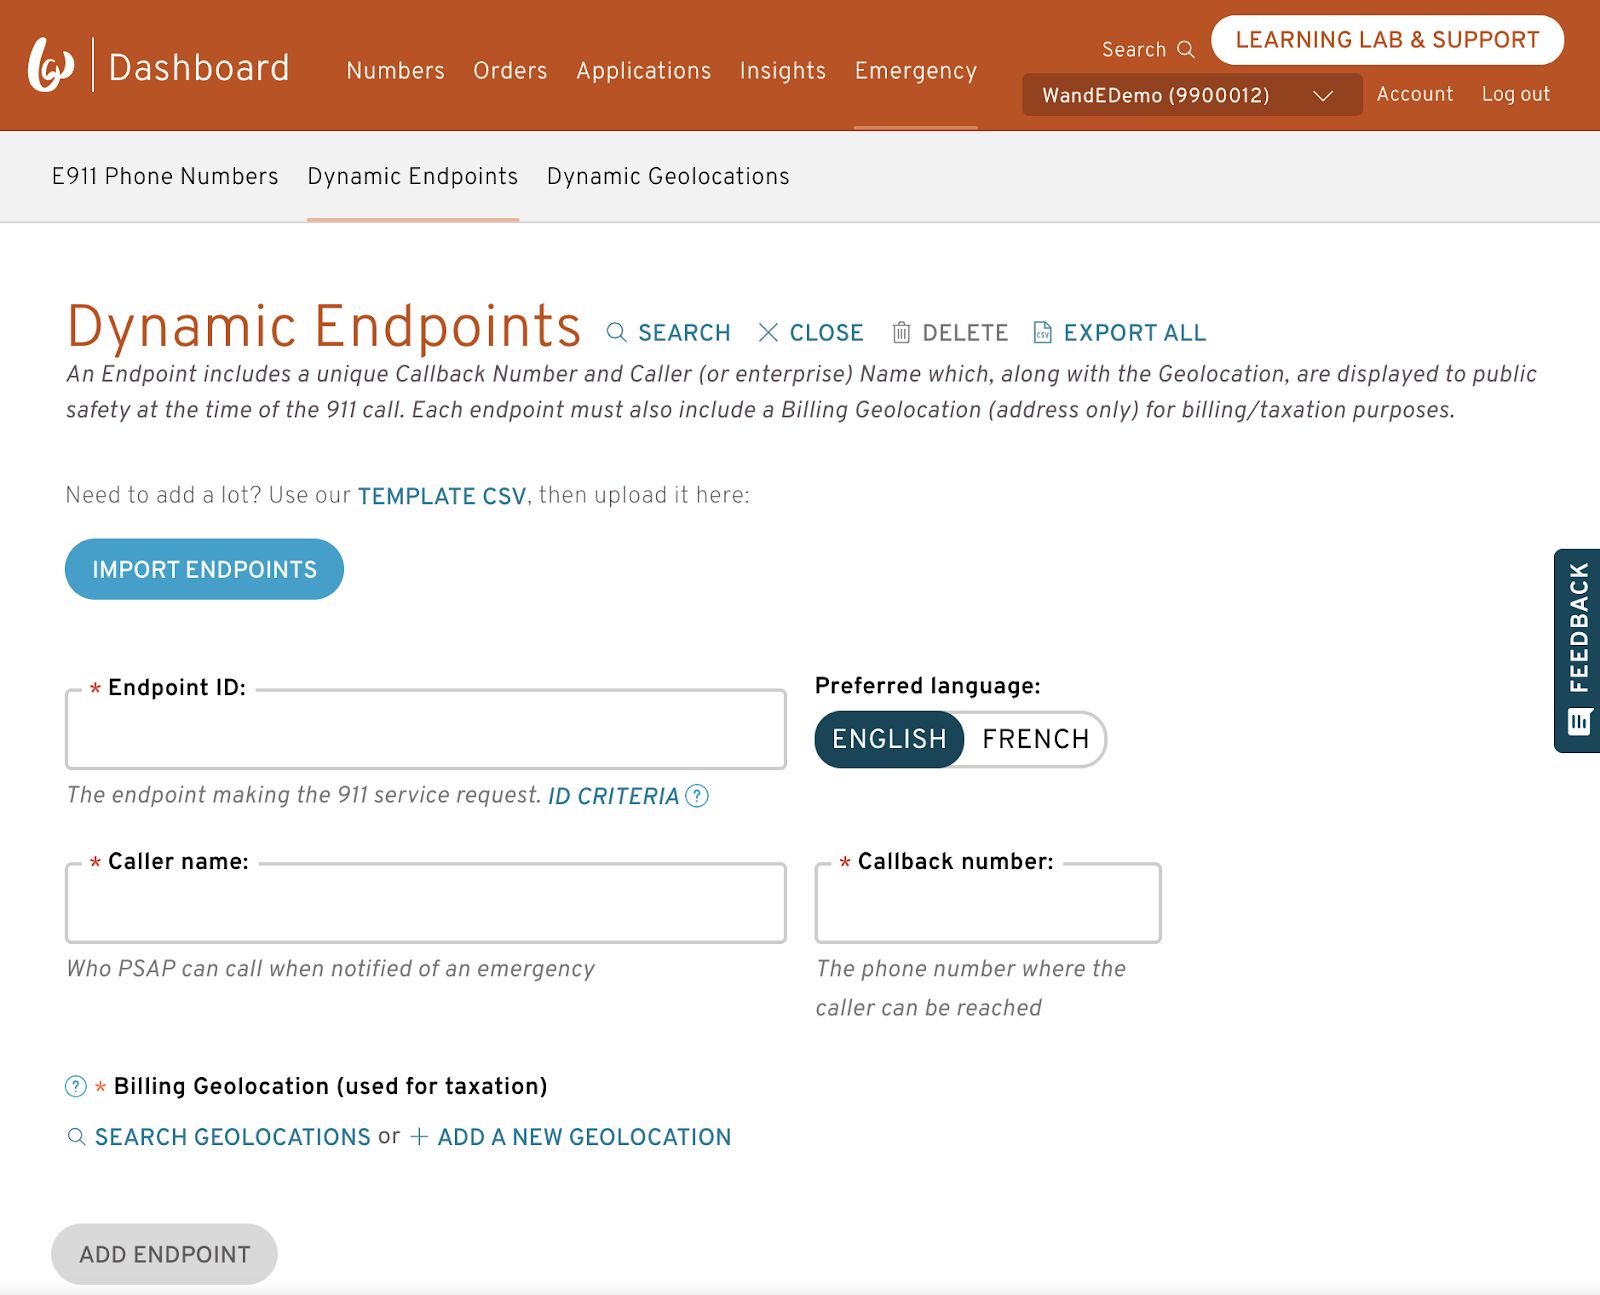 Adding Endpoints